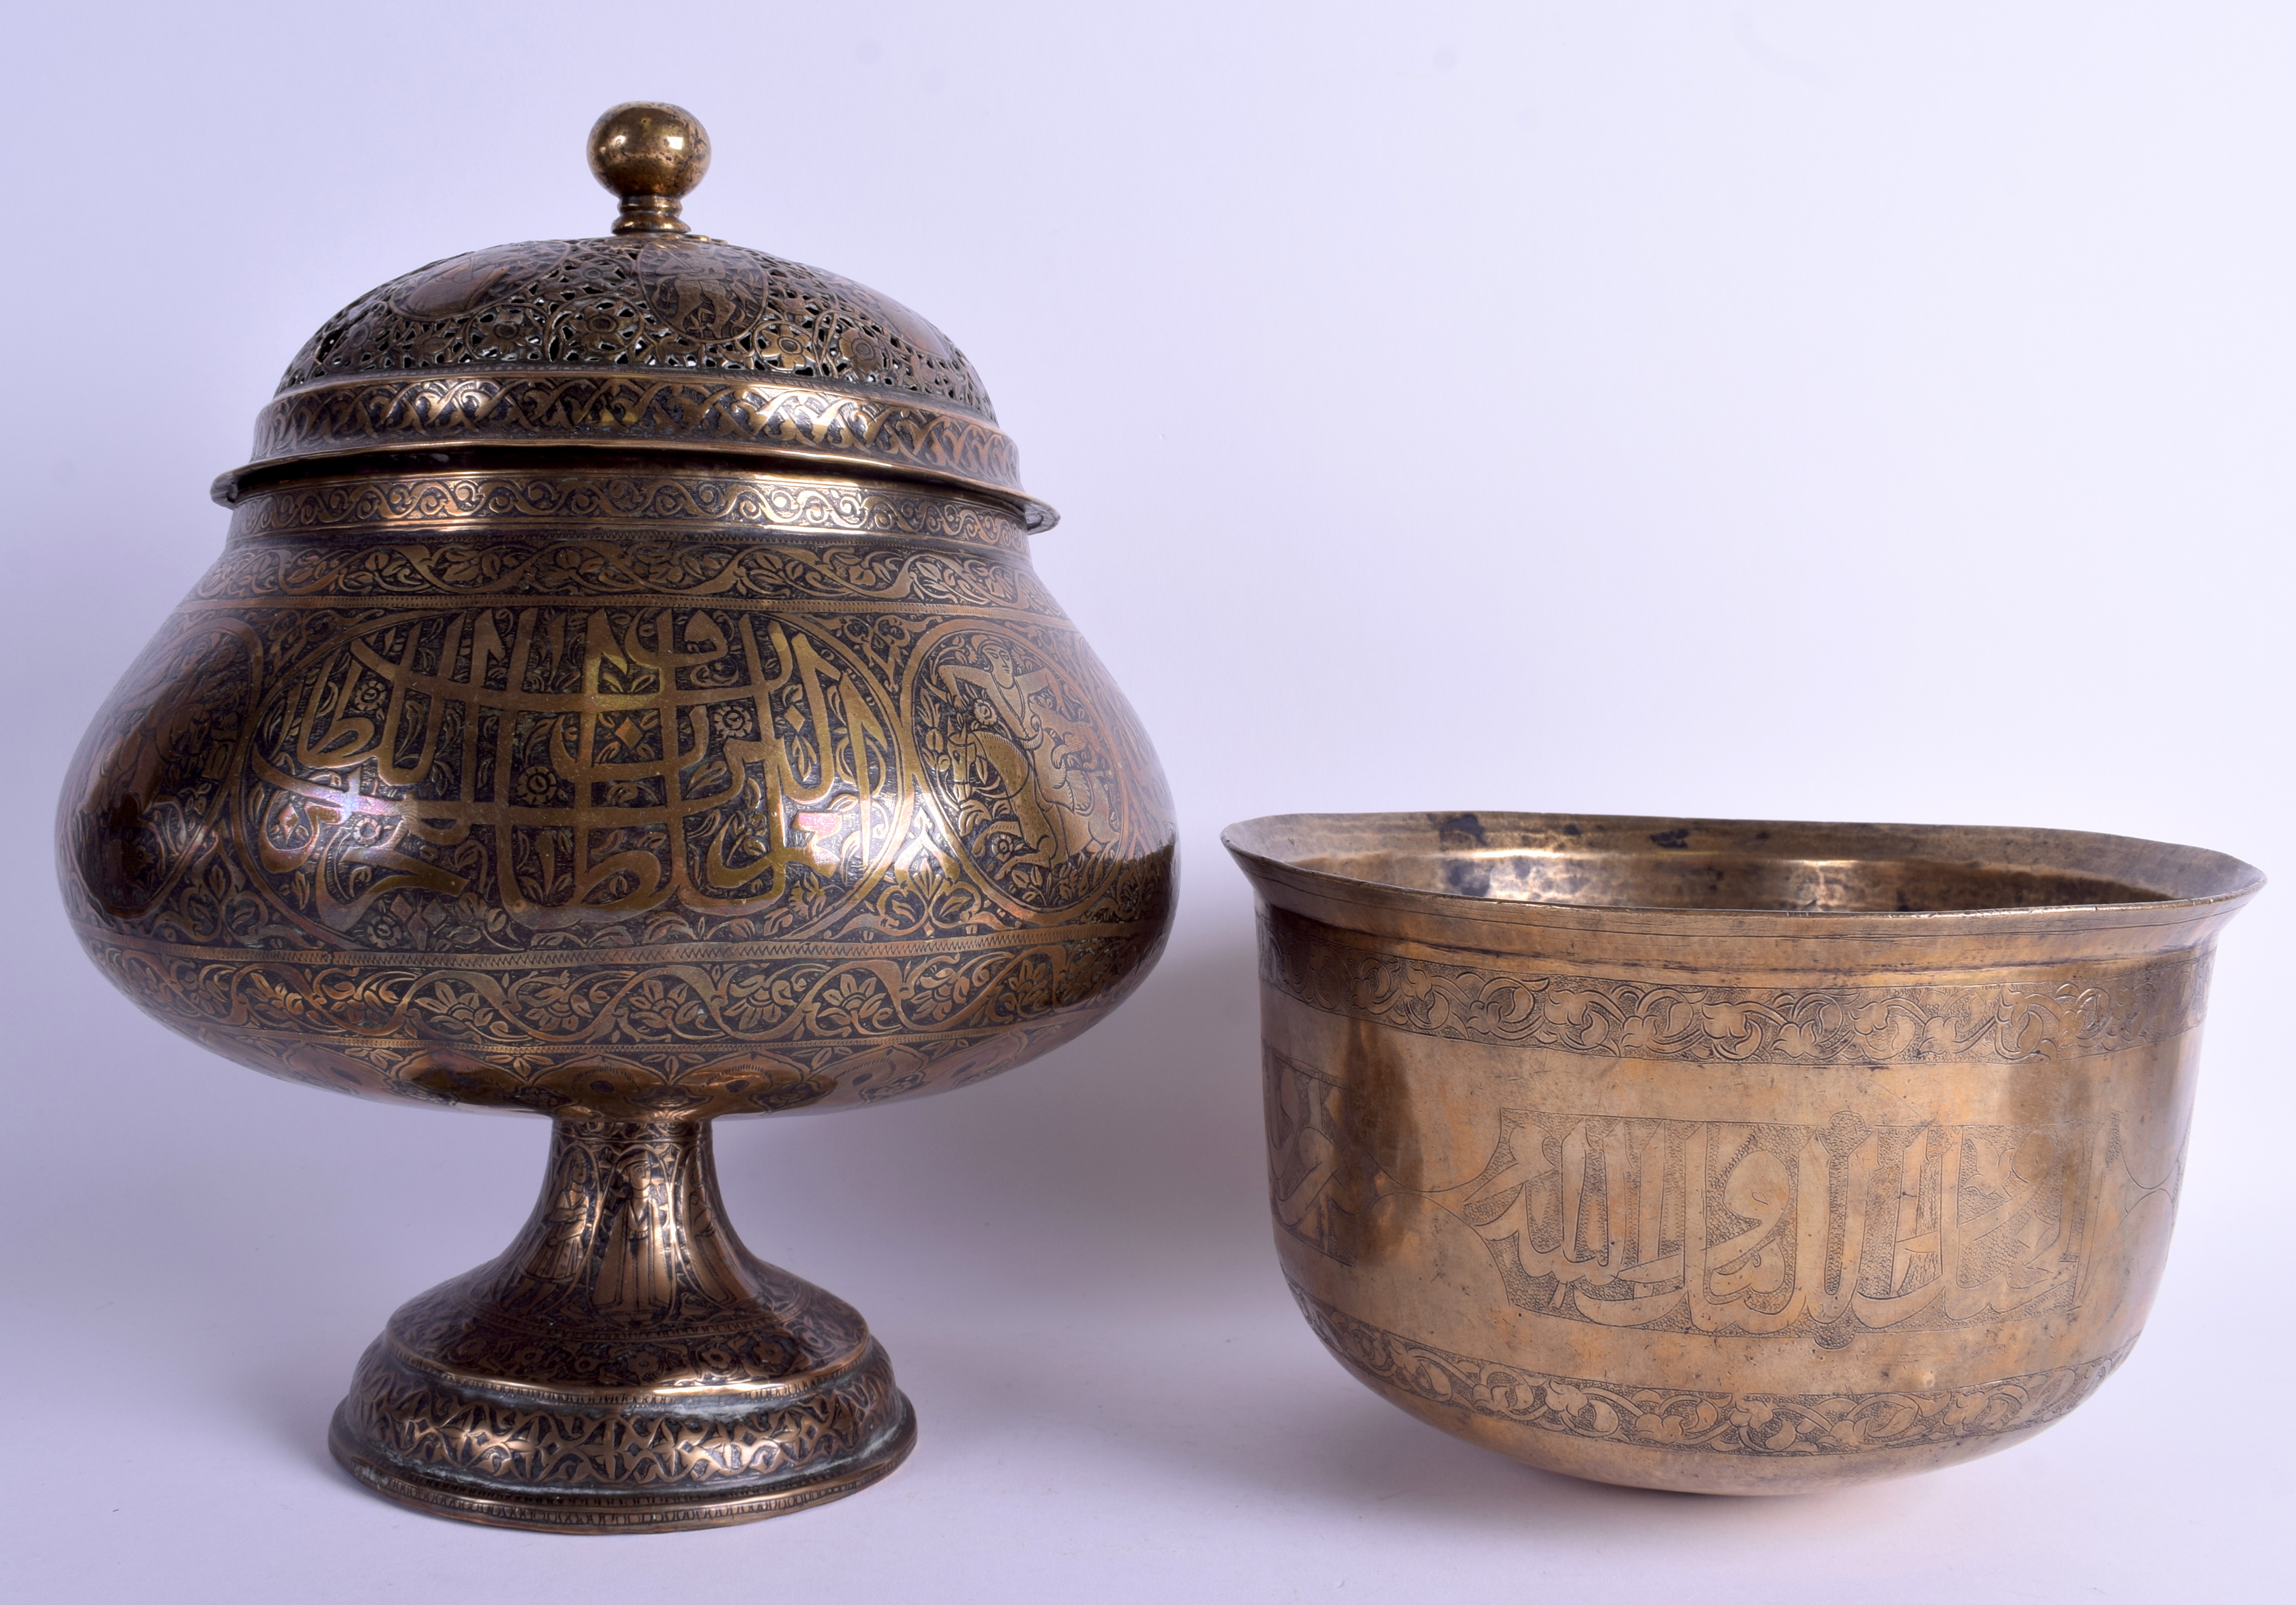 A RARE LARGE EARLY IRANIAN INCENSE BURNER AND COVER Attributed to Persian Metal Master Baqir Hakkak - Image 2 of 4